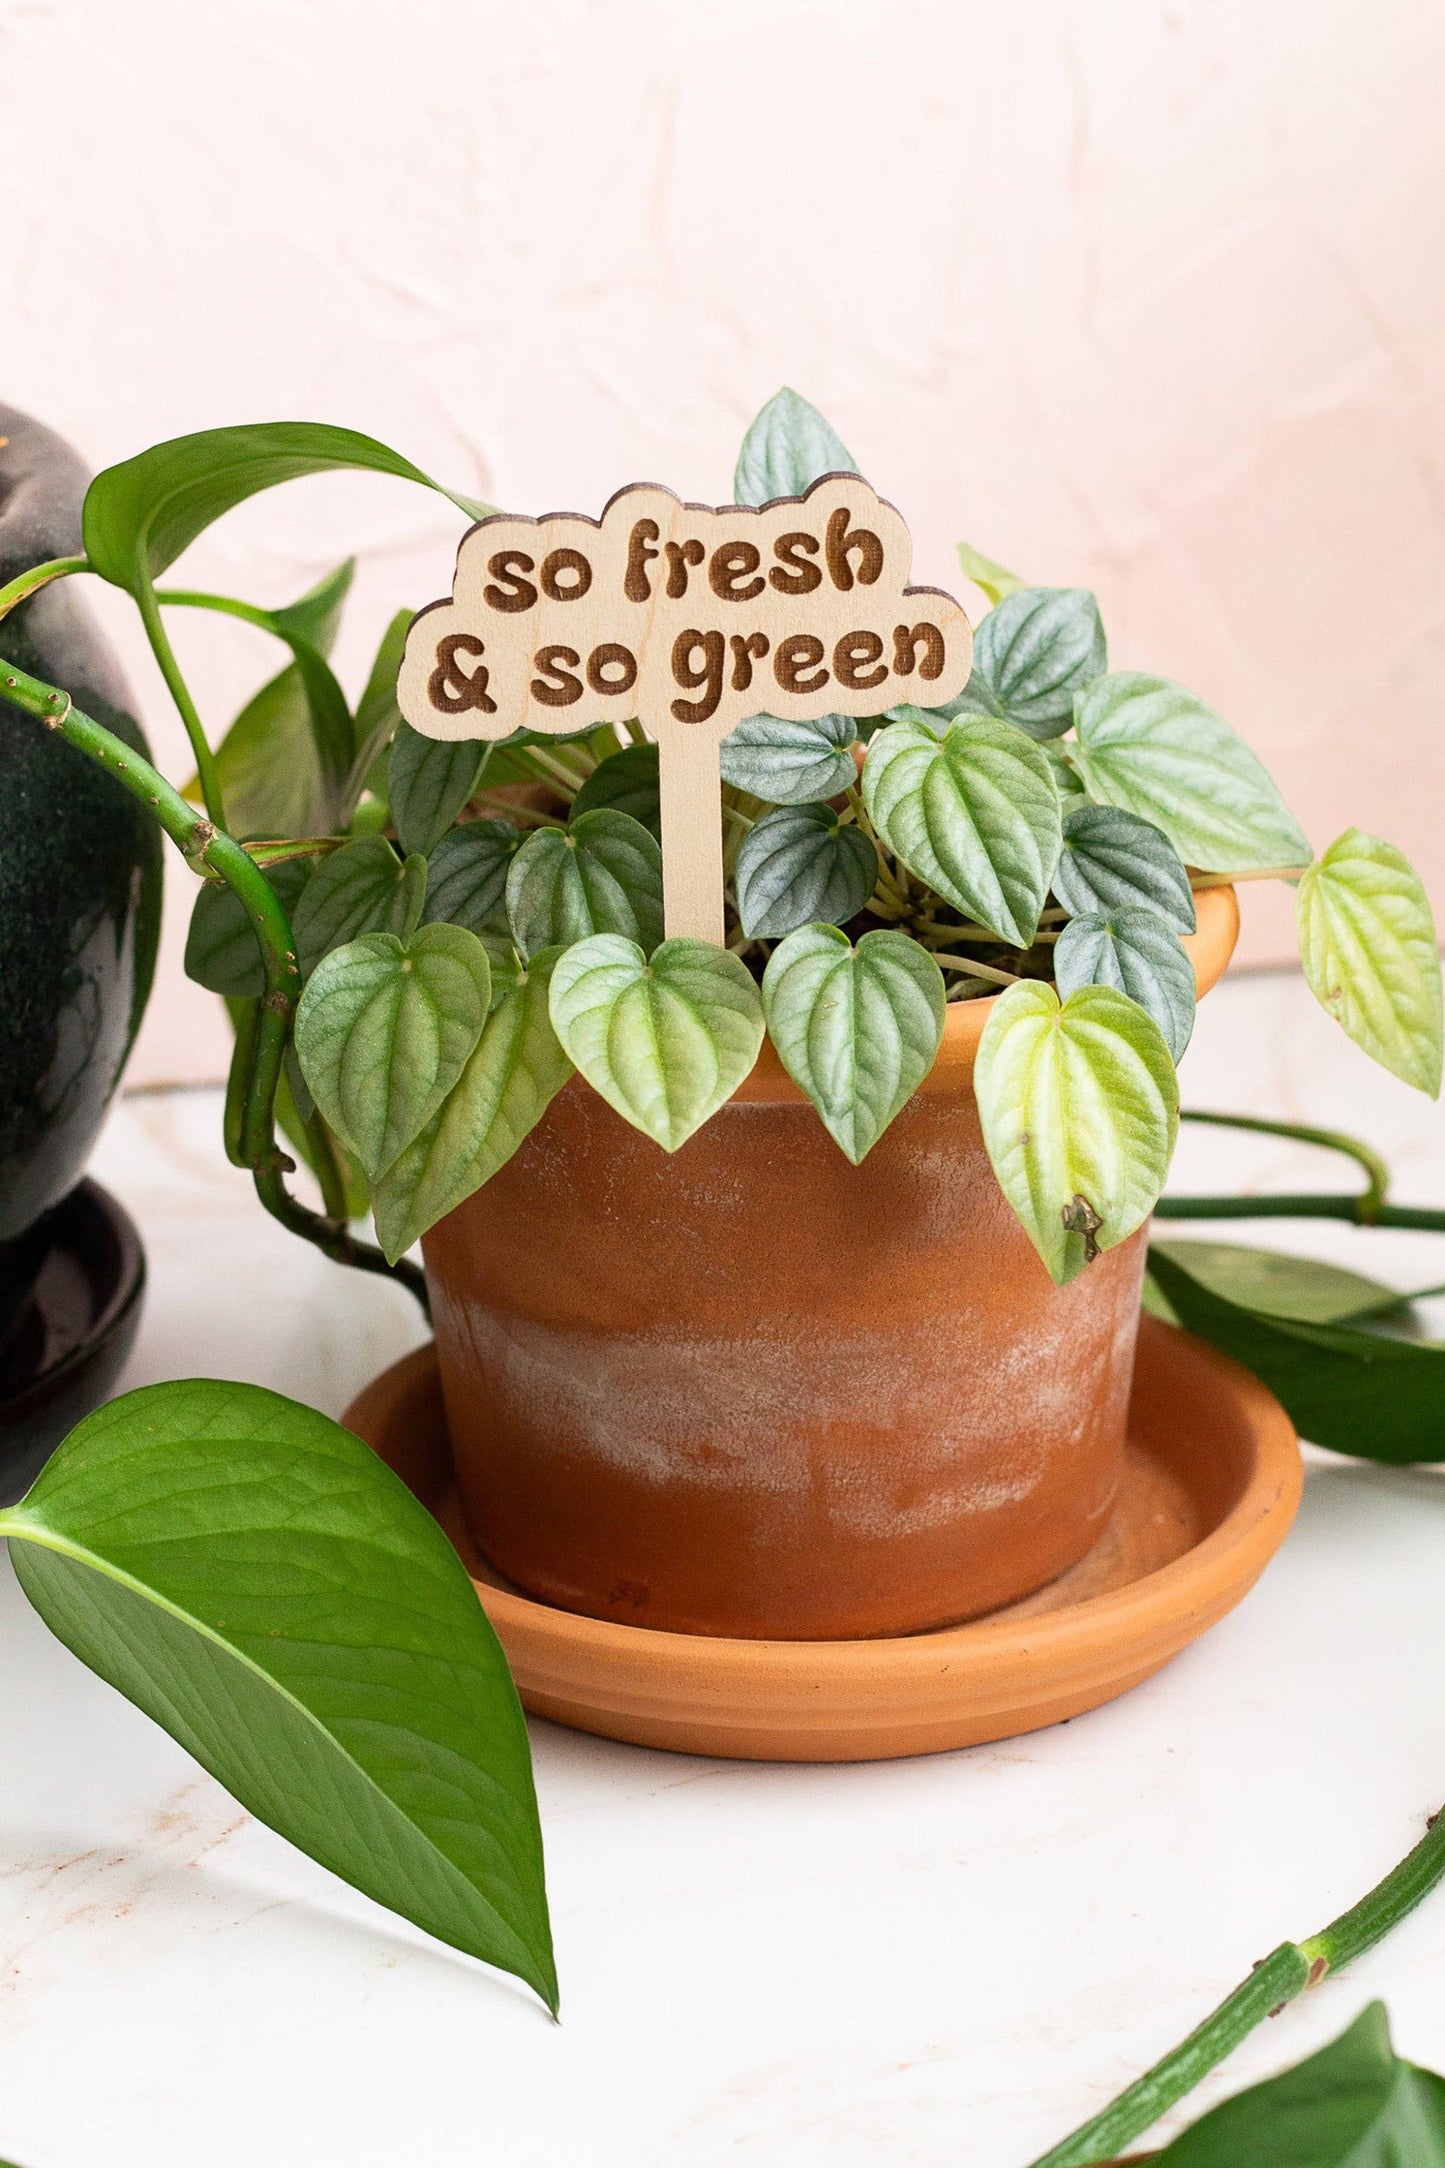 Retro Funny Wooden Plant Markers - Crazy plant lady